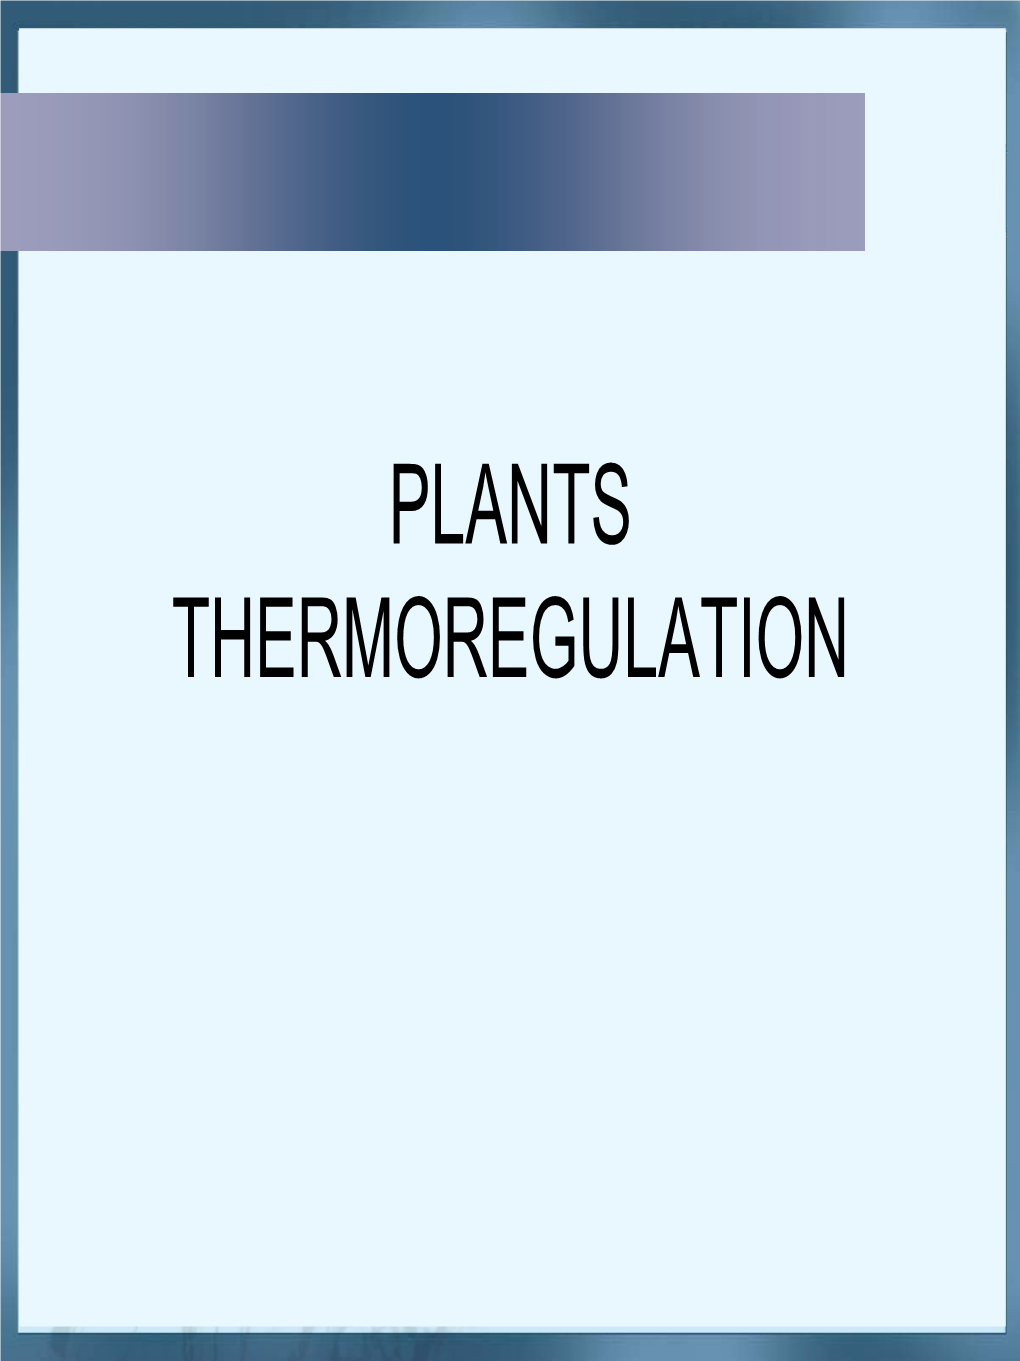 PLANTS THERMOREGULATION Introduction